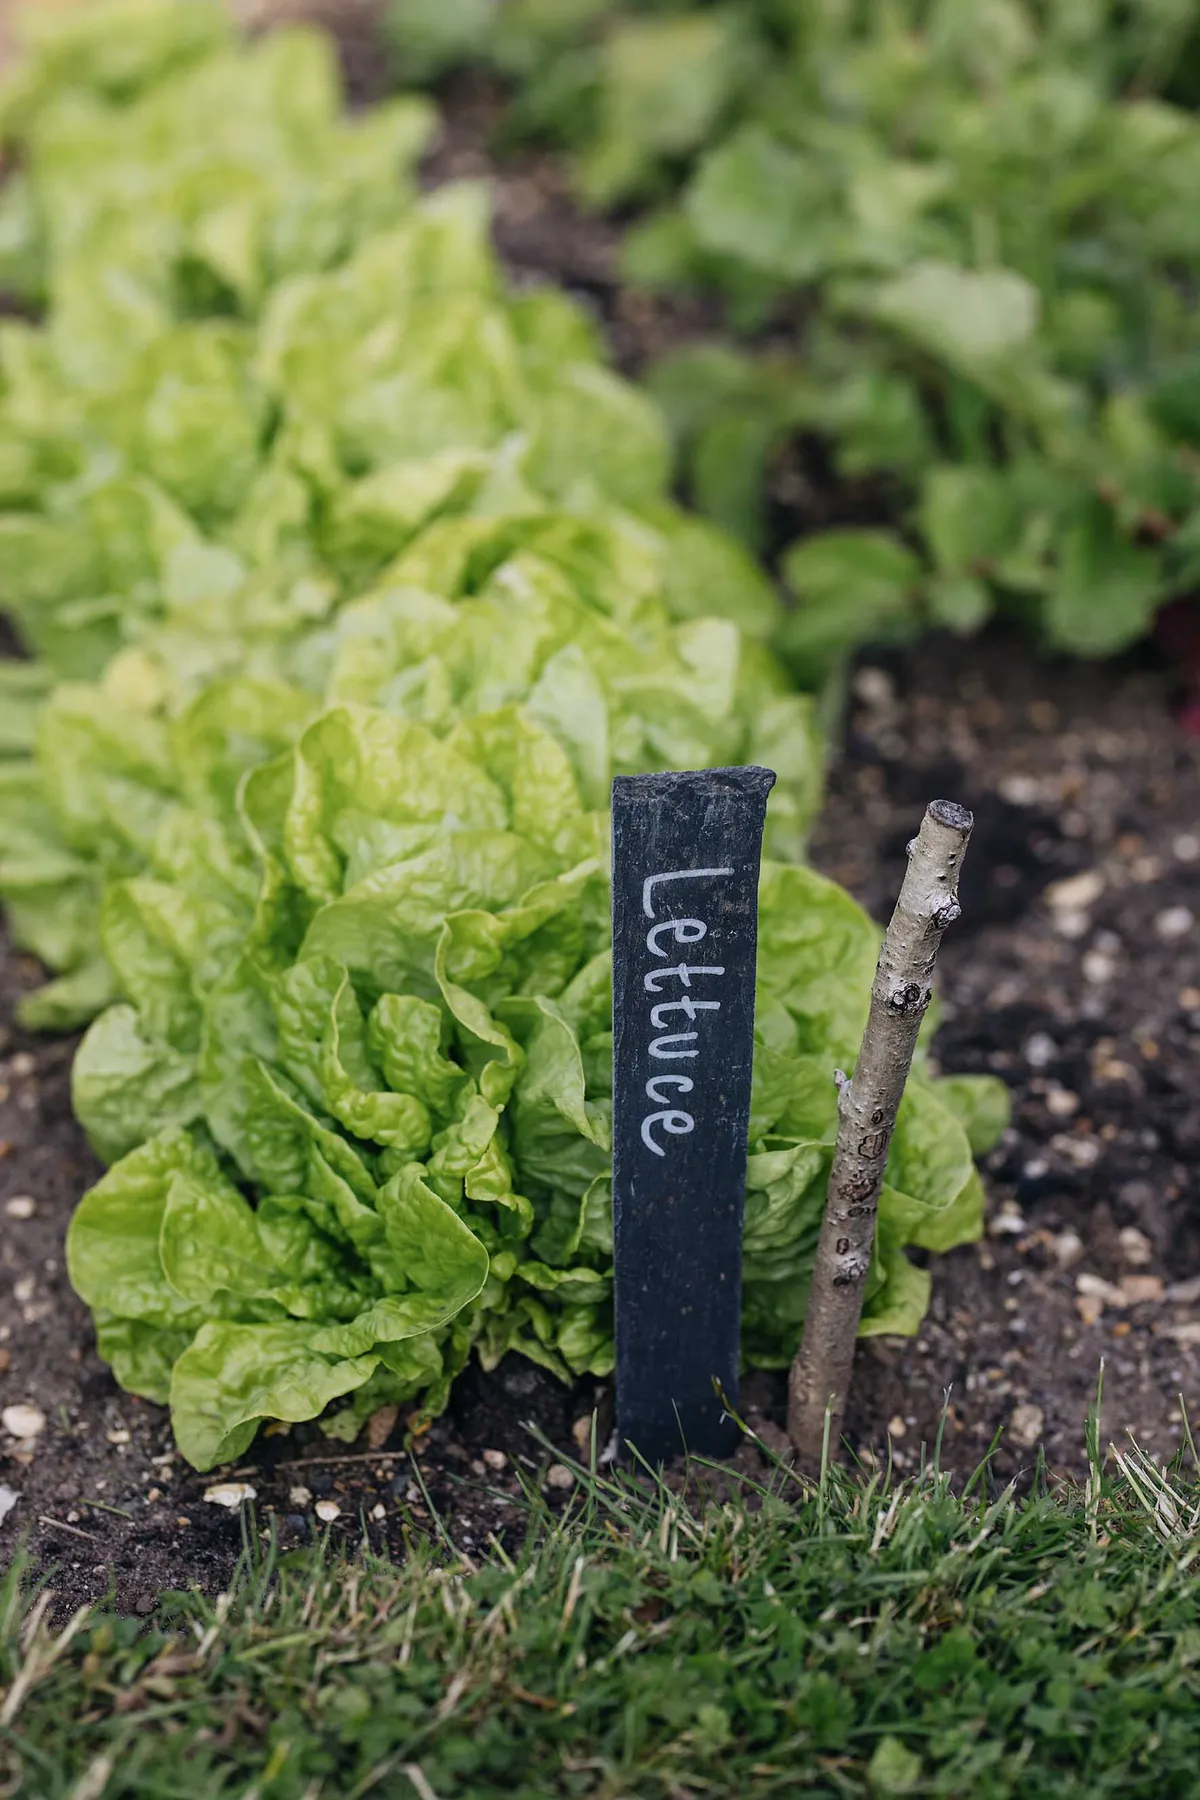 Salad crops, including these butterhead lettuces, are a popular addition to the Veg Garden.